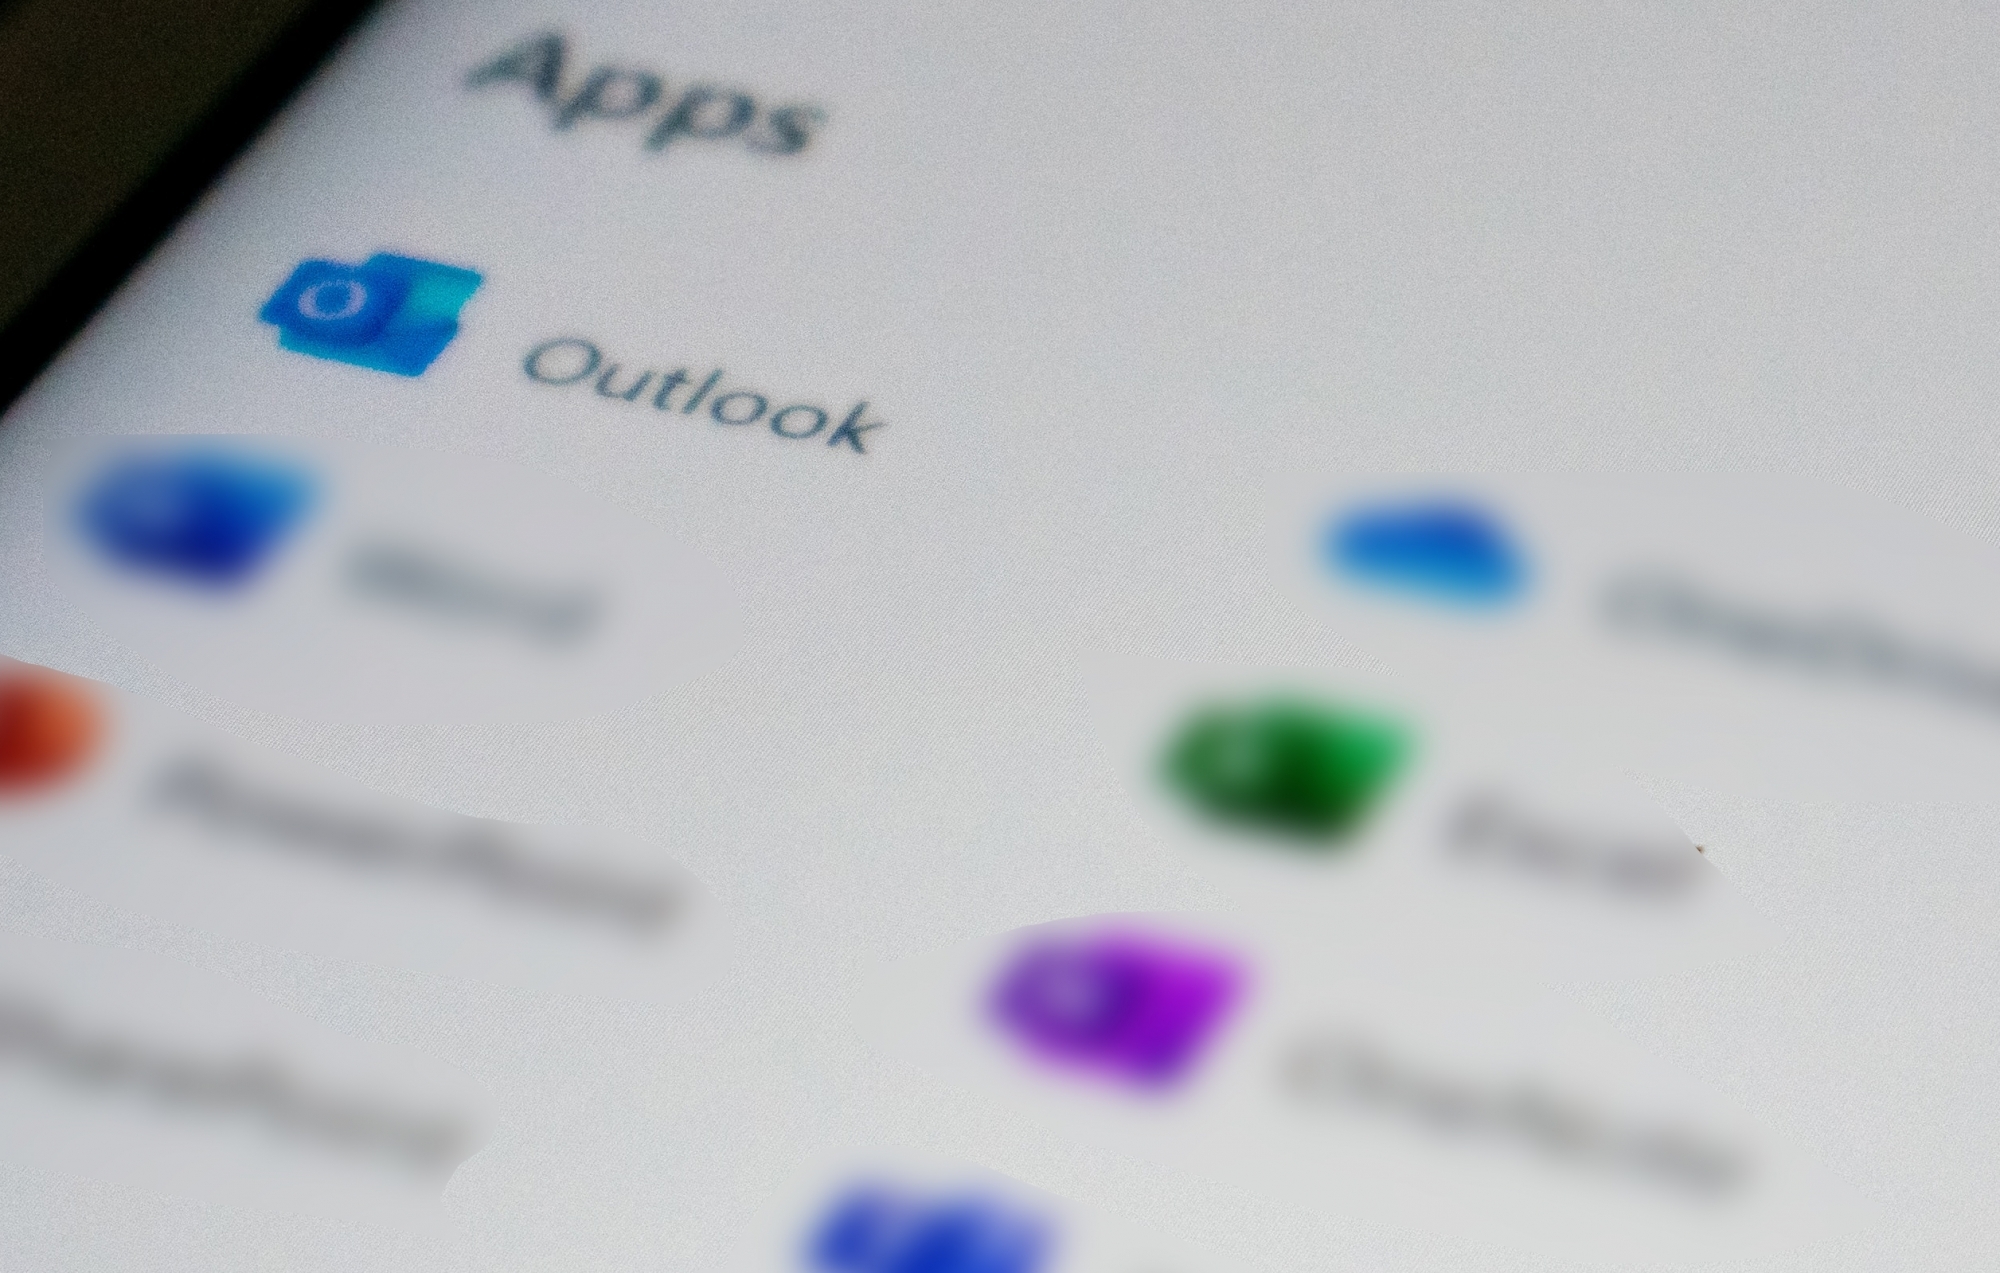 New AIenabled Outlook app to replace Mail, Calendar apps on Windows 11